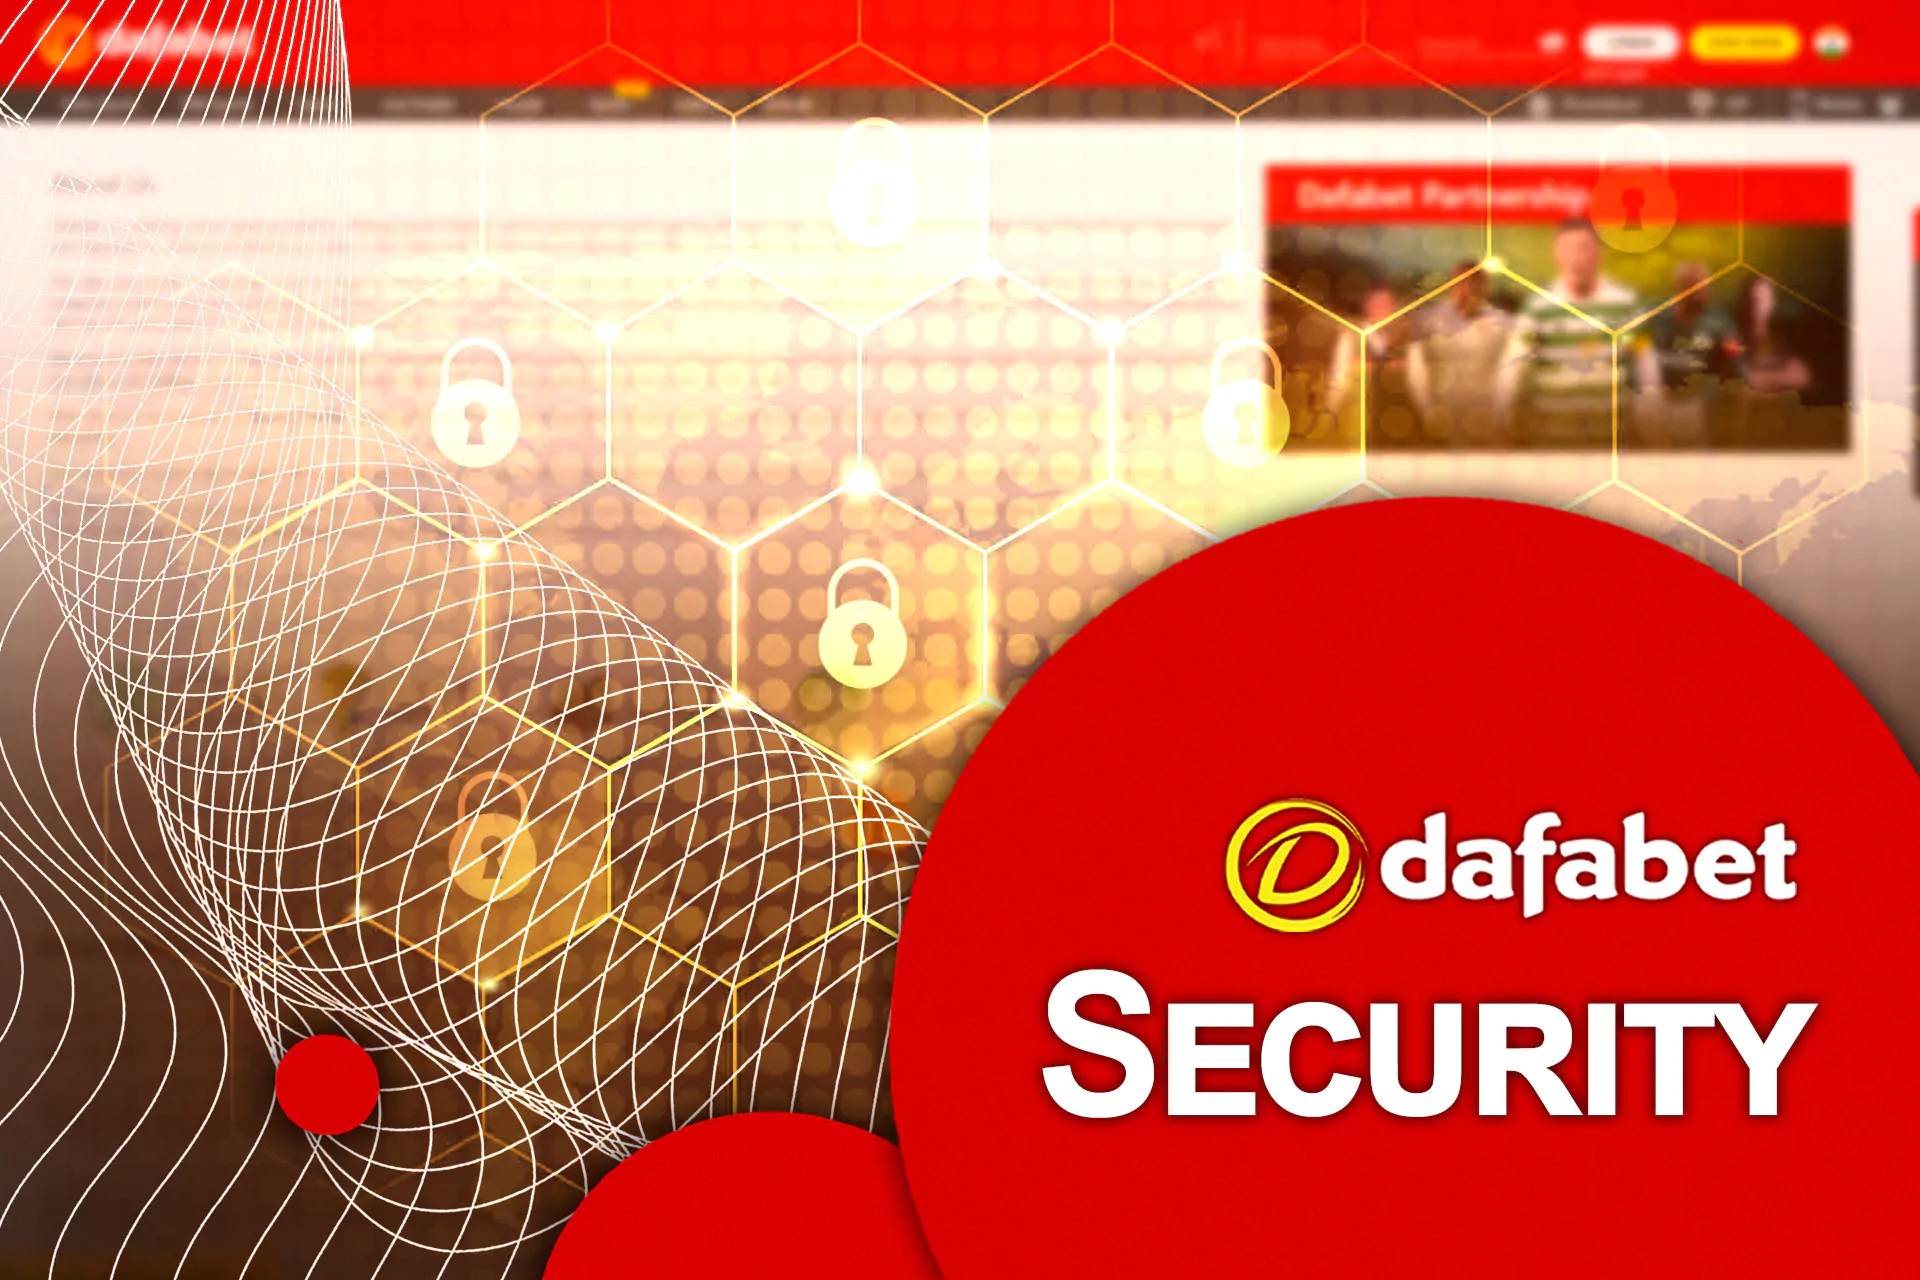 The Dafabet team provides a trustworthy and secure platform for online betting.